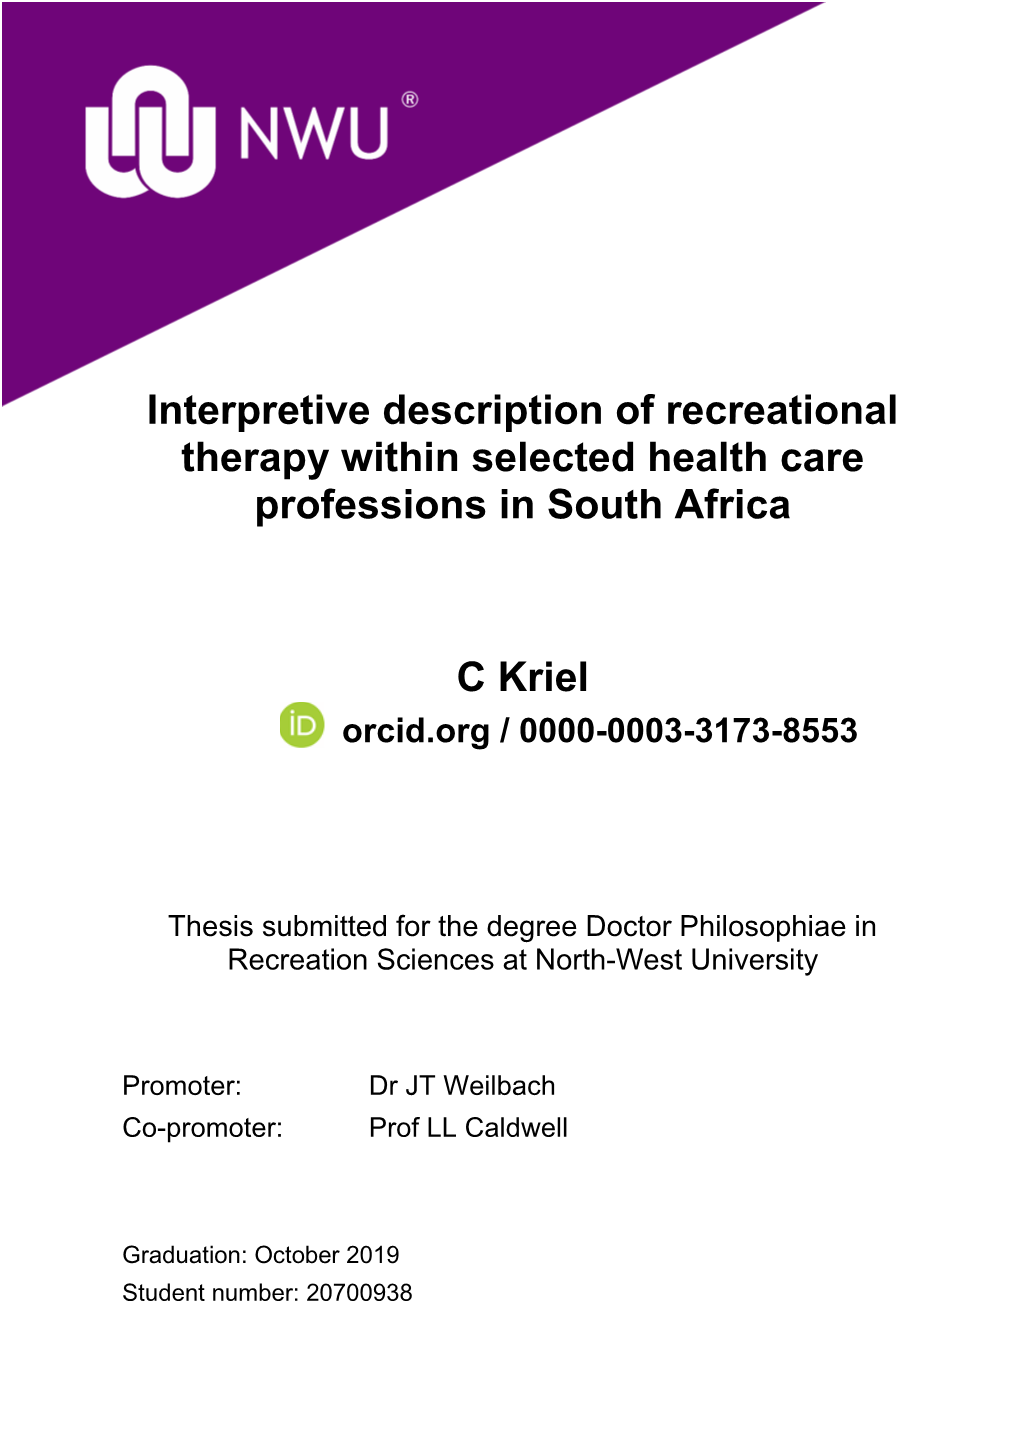 Interpretive Description of Recreational Therapy Within Selected Health Care Professions in South Africa